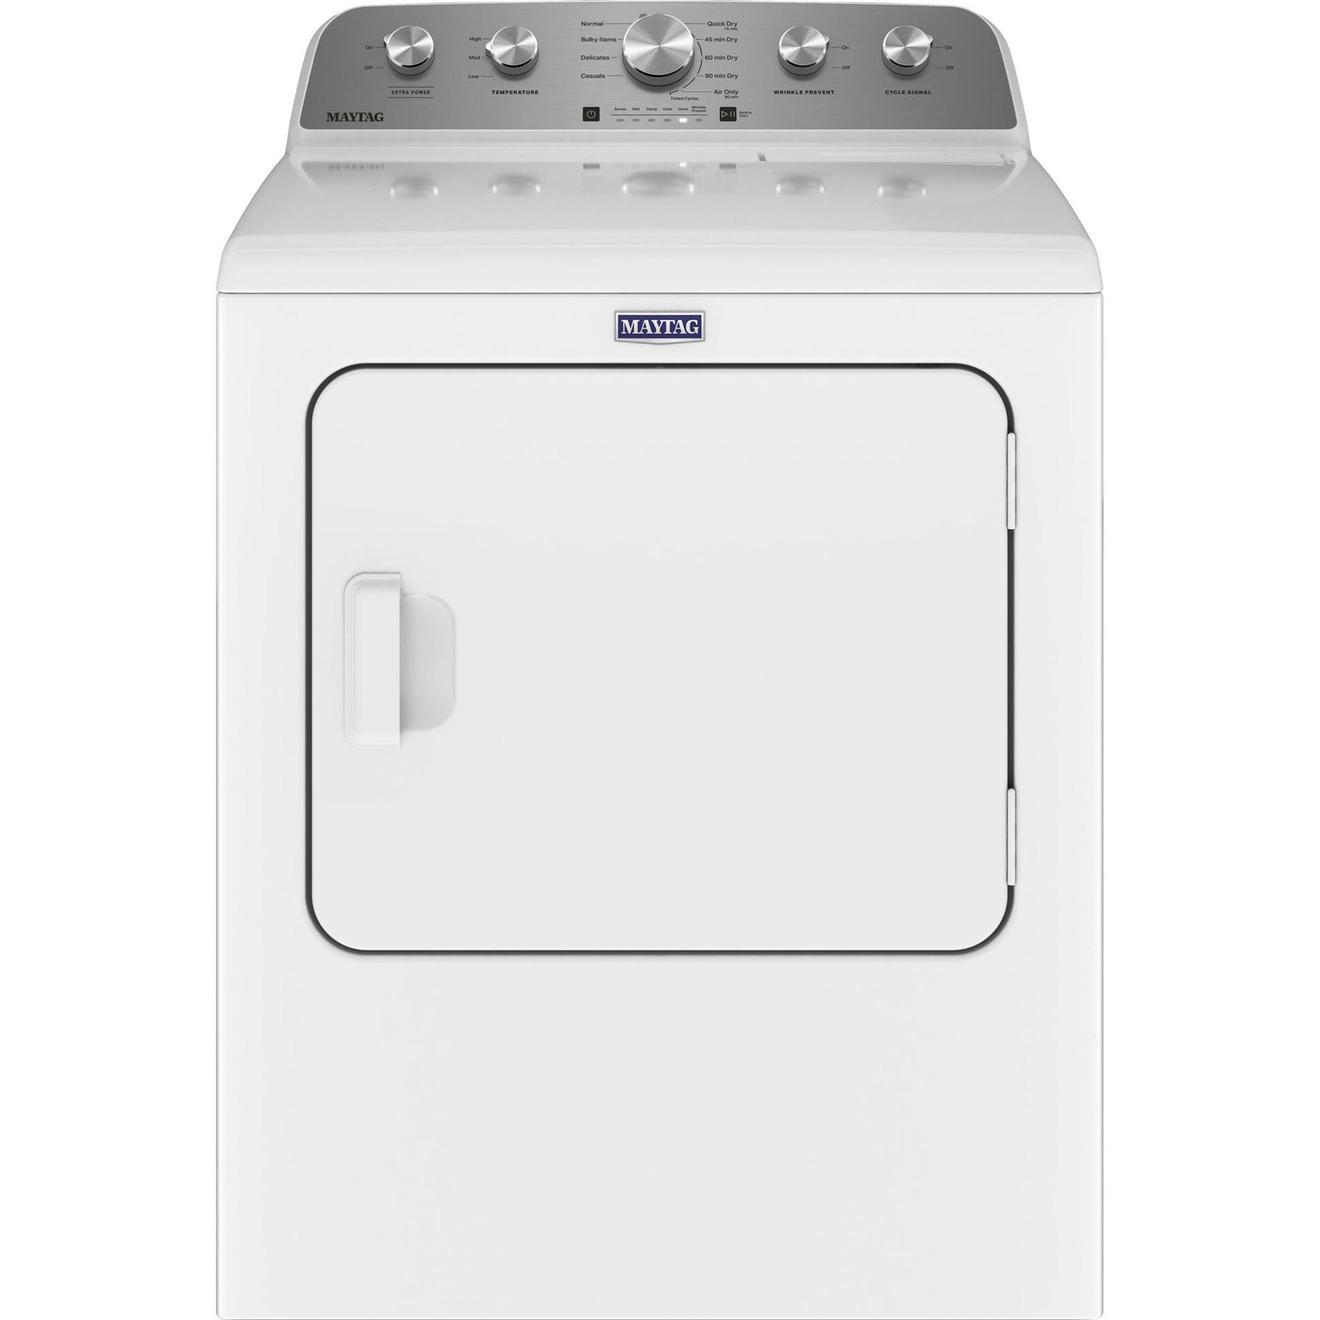 Maytag 7.0 cu.ft. Vented Dryer offers at $749.98 in Trail Appliances